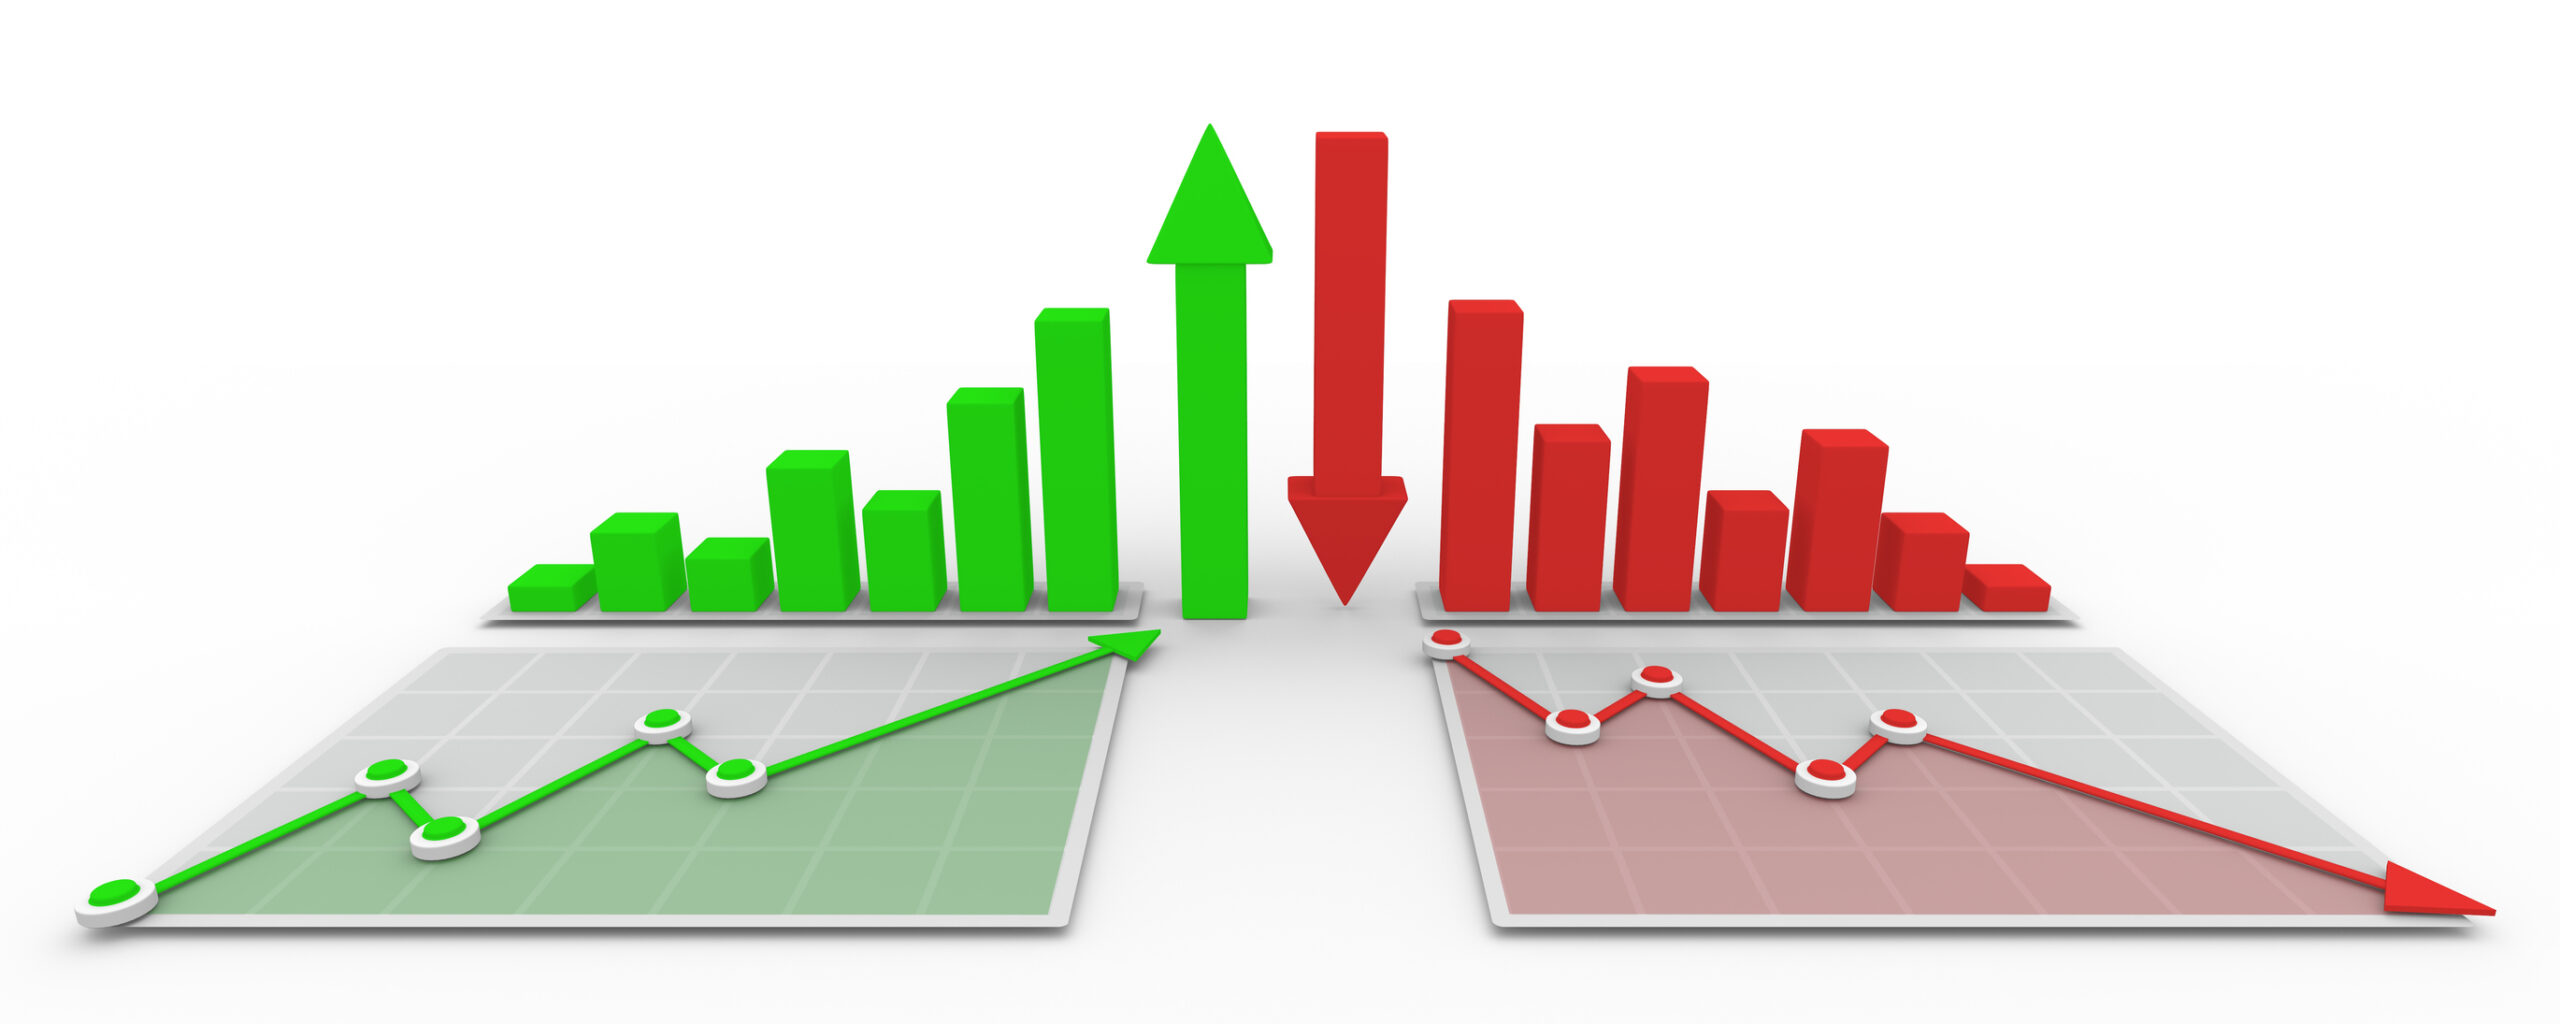 Profit and debt illustrated with green and red graphs